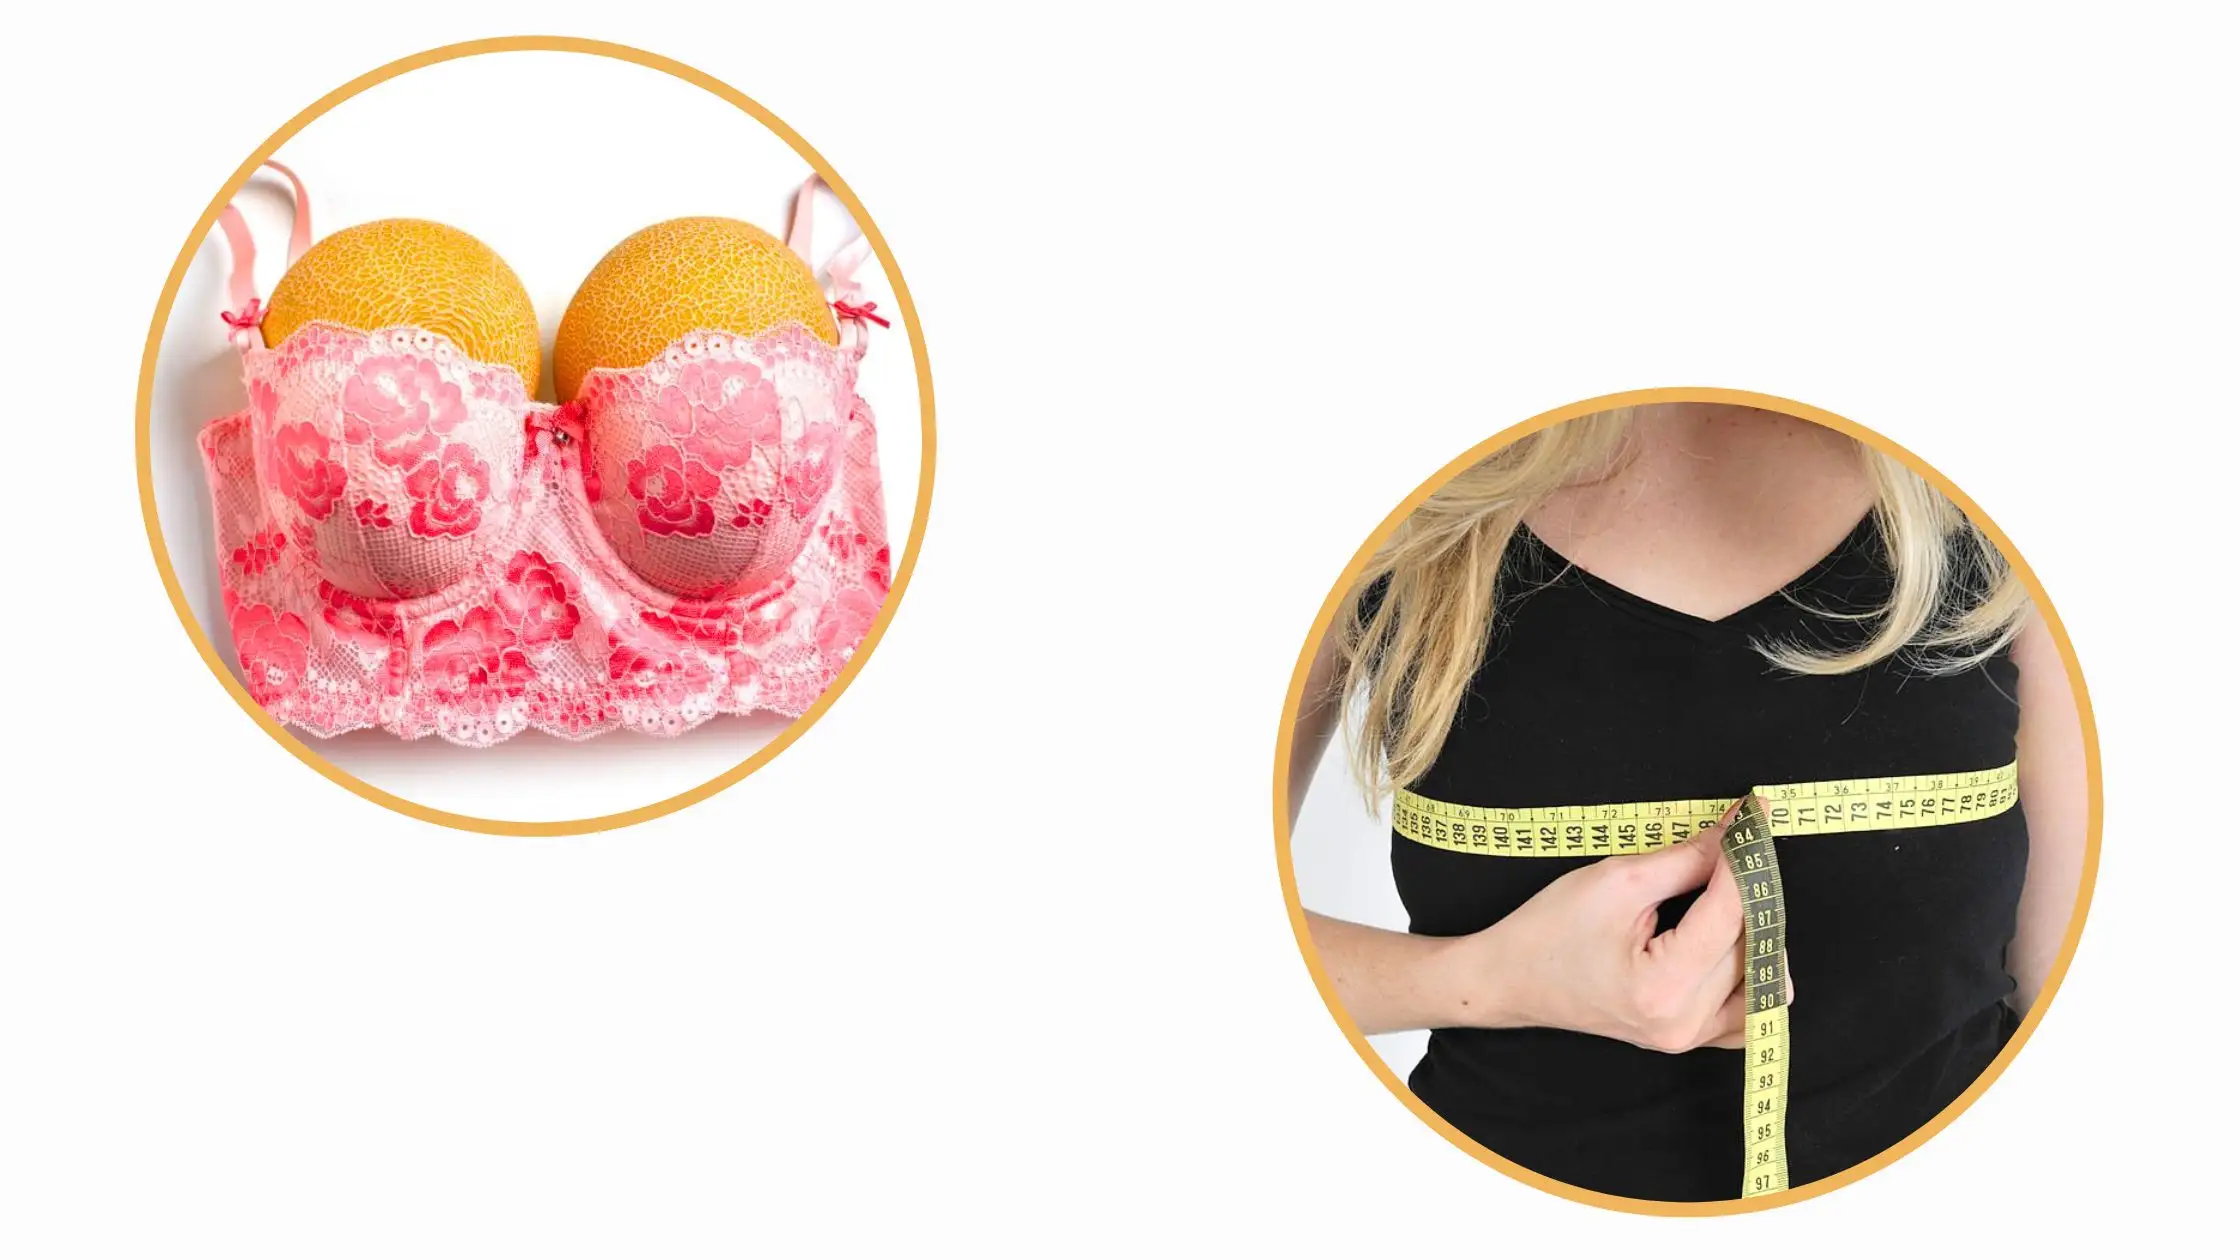 Factors That Lead To An Expanded Breast Size